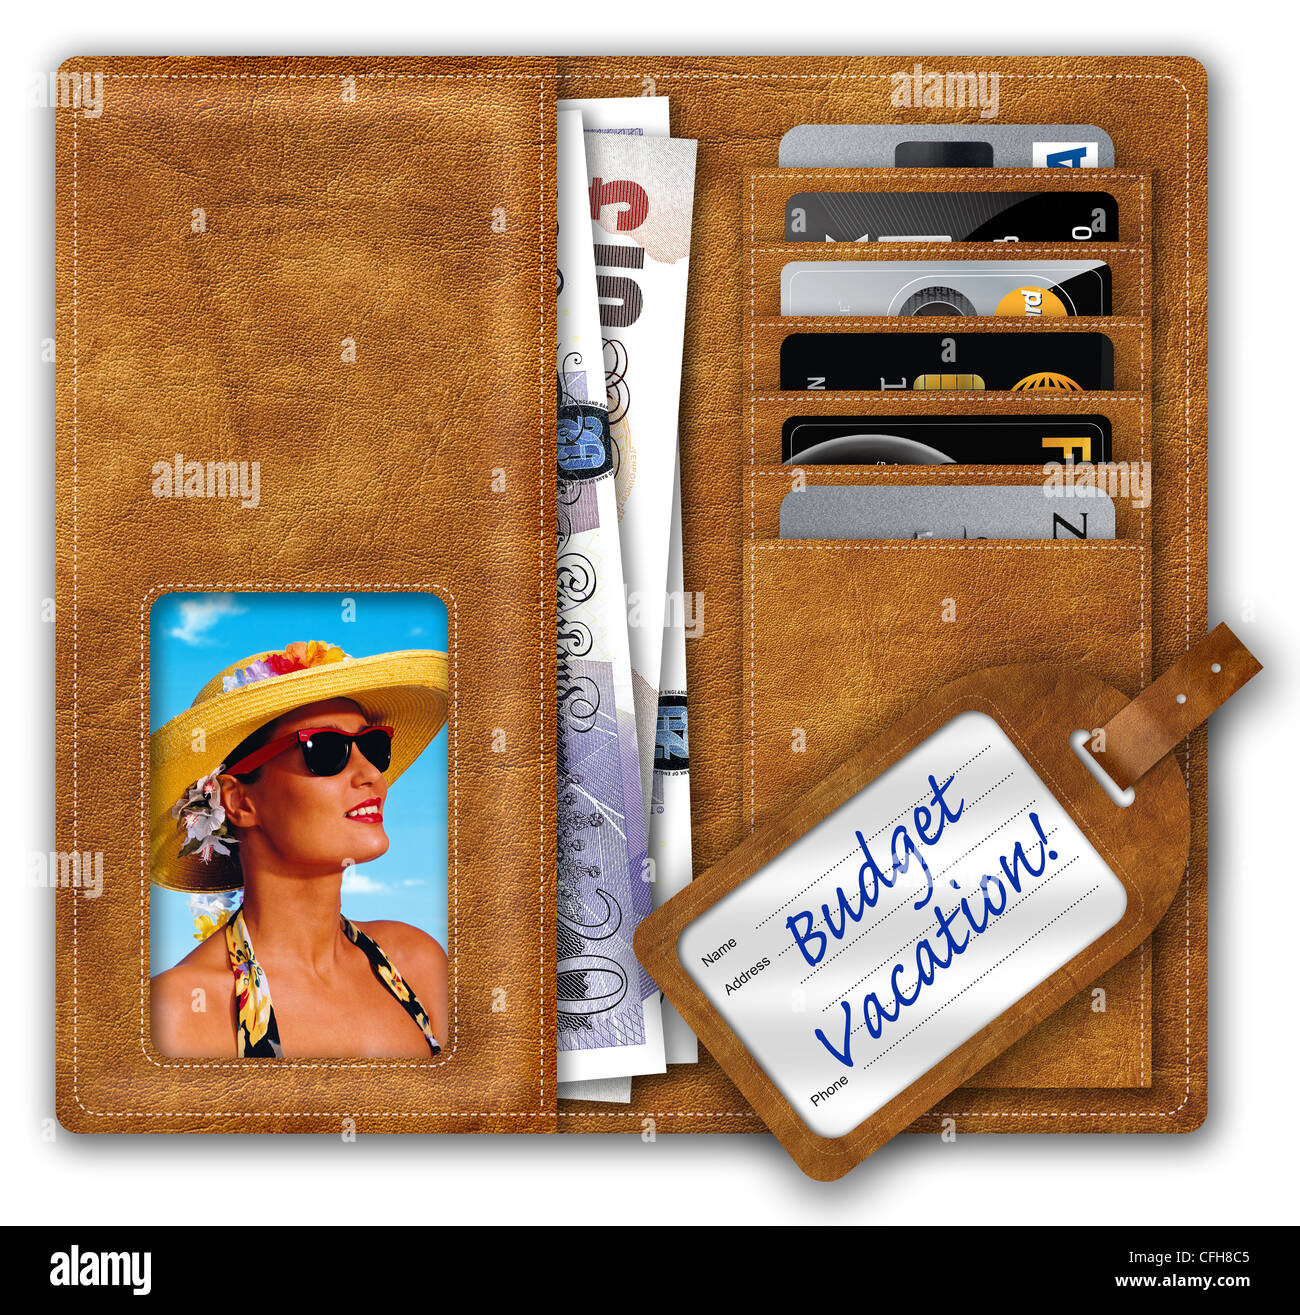 Wallet containing UK Sterling/Pounds and credit cards, picture of holdaymaker and Budget Vacation luggage label. Stock Photo